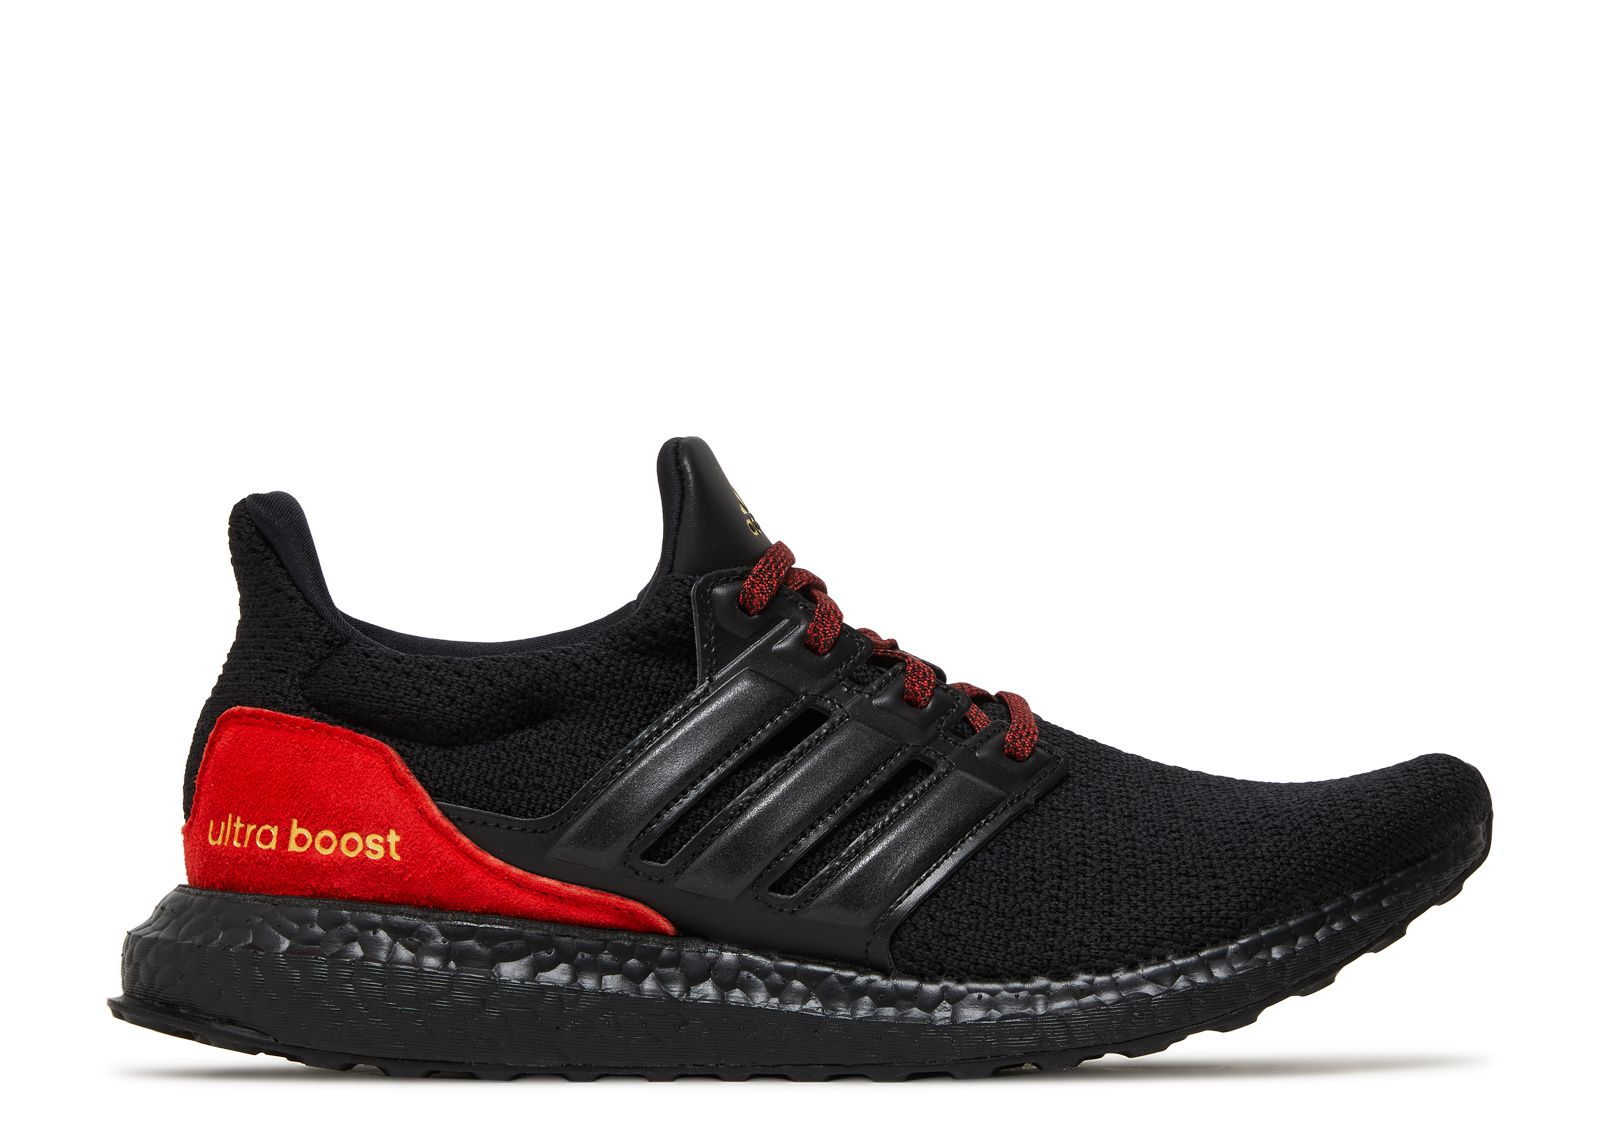 Кроссовки adidas Ultraboost Dna 'Black Red', черный кроссовки adidas performance ultraboost dna unisex core black carbon bright red